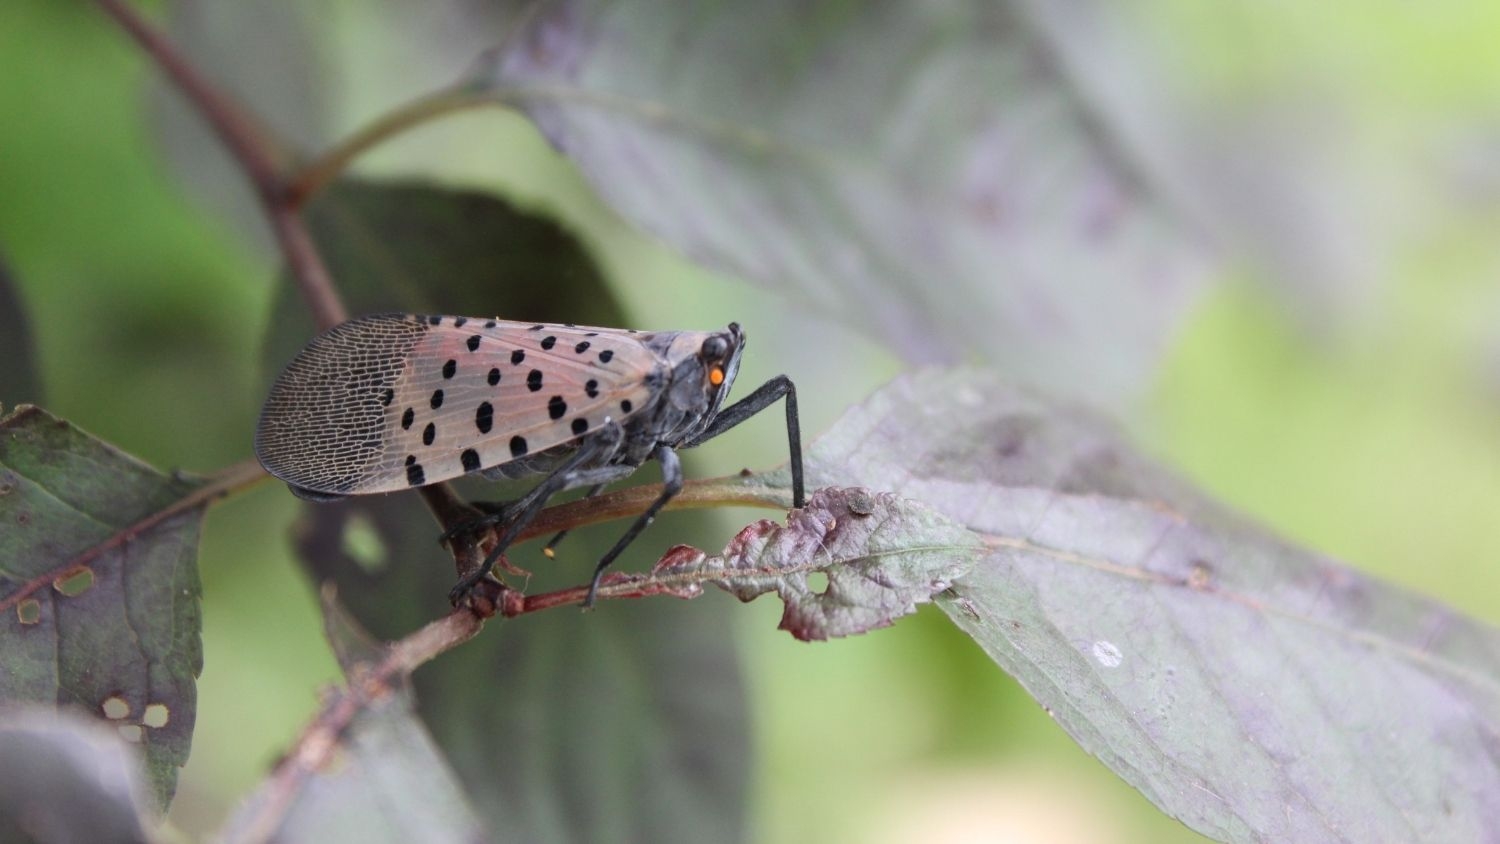 Spotted lanternfly on leaf - Ask an Expert: How Will the Spotted Lanternfly Impact North Carolina? - Forestry and Environmental Resources NC State University